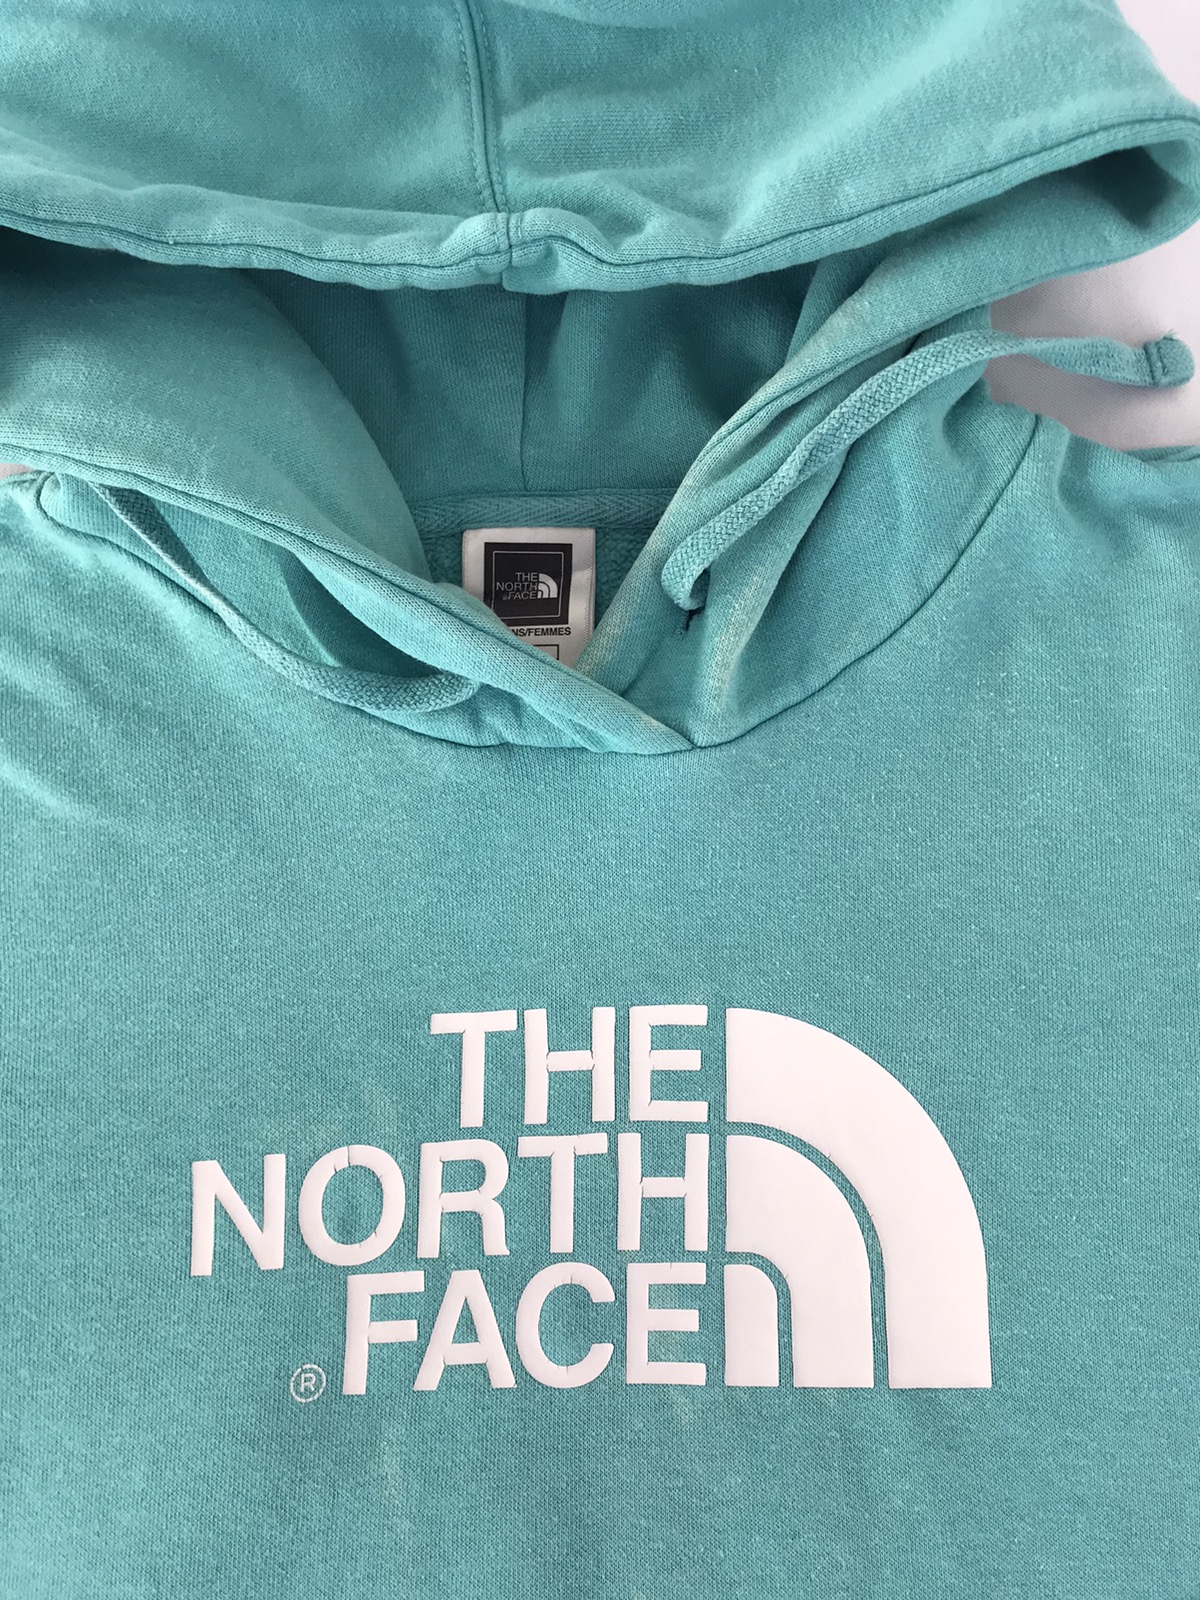 The North Face Pull Over Hoodies Brand Box Logo - 4